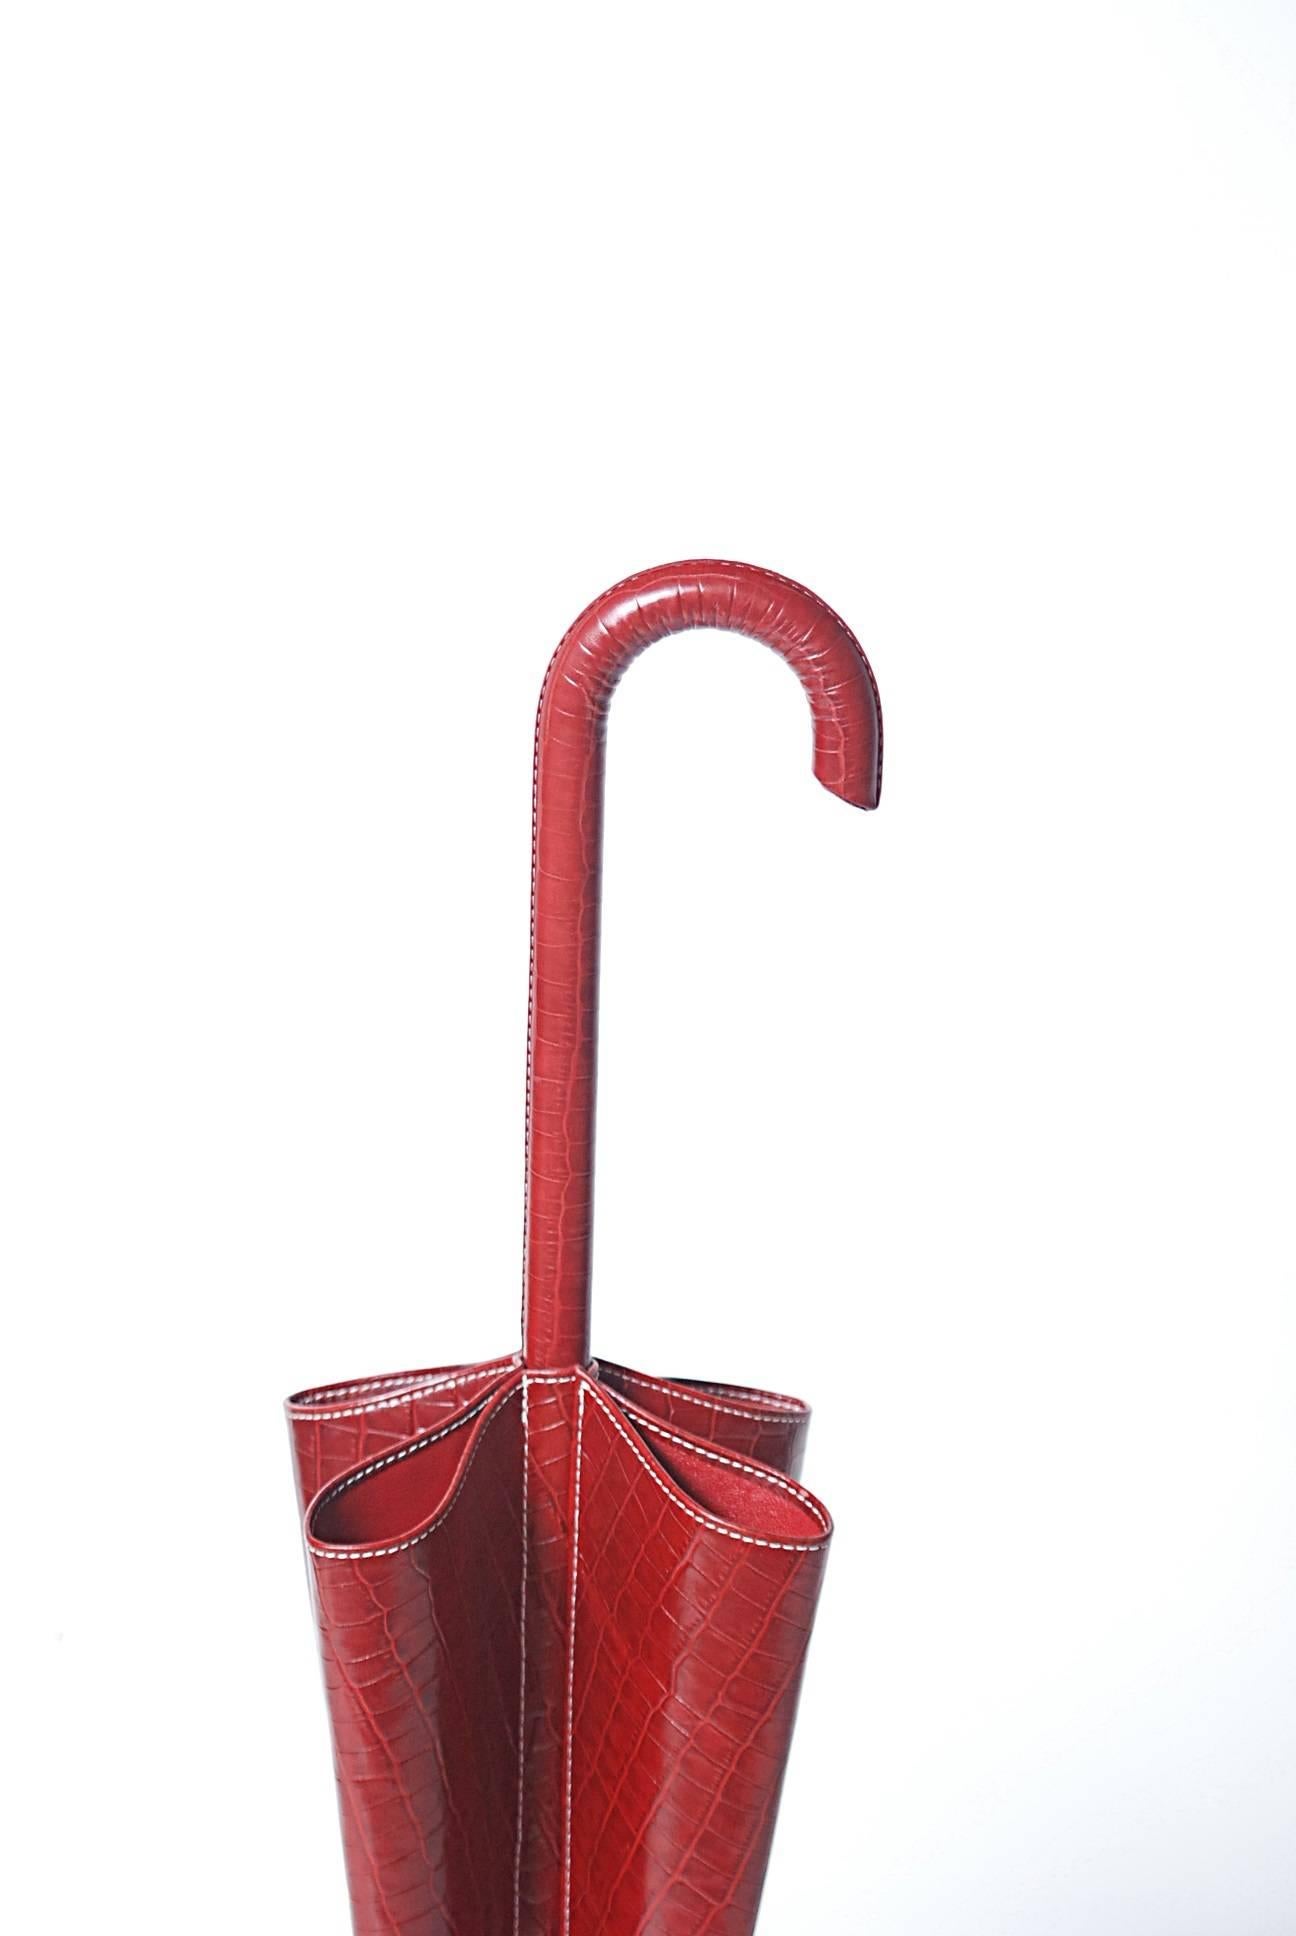 Red umbrella stand with reptile skin pattern in the leather. Marked on bottom 